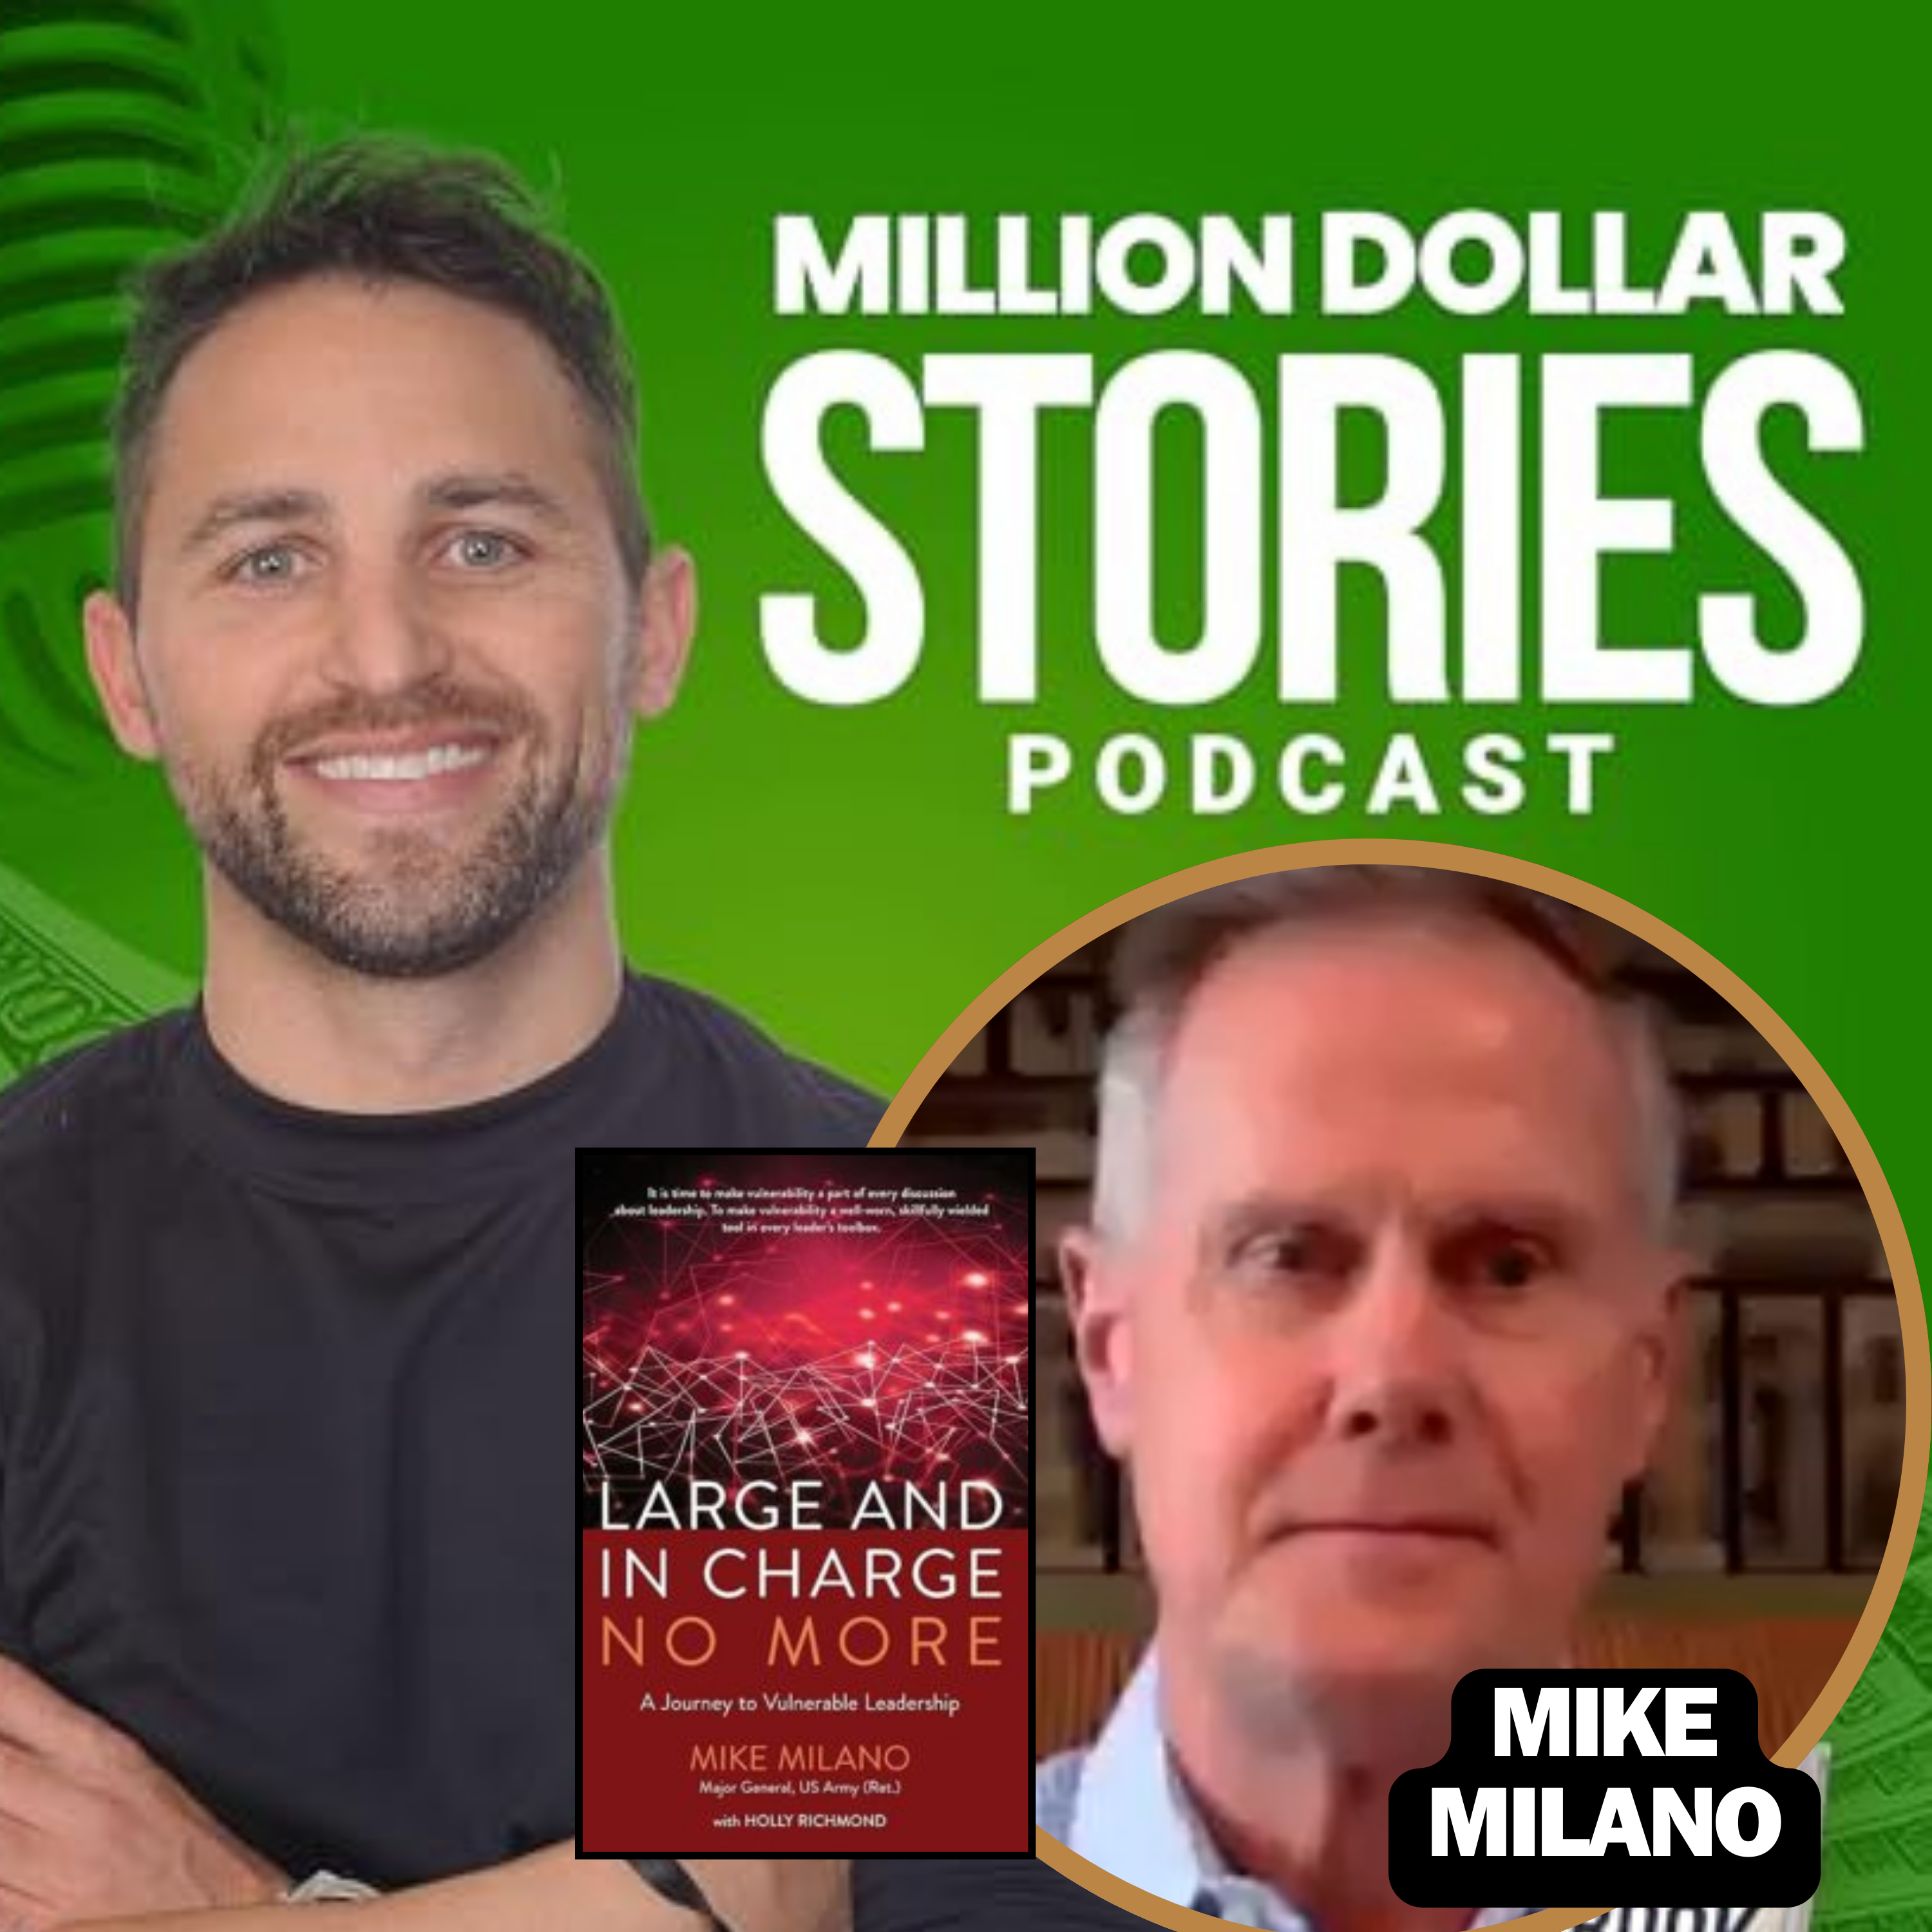 Mike Milano – Author of “Large and In Charge No More”